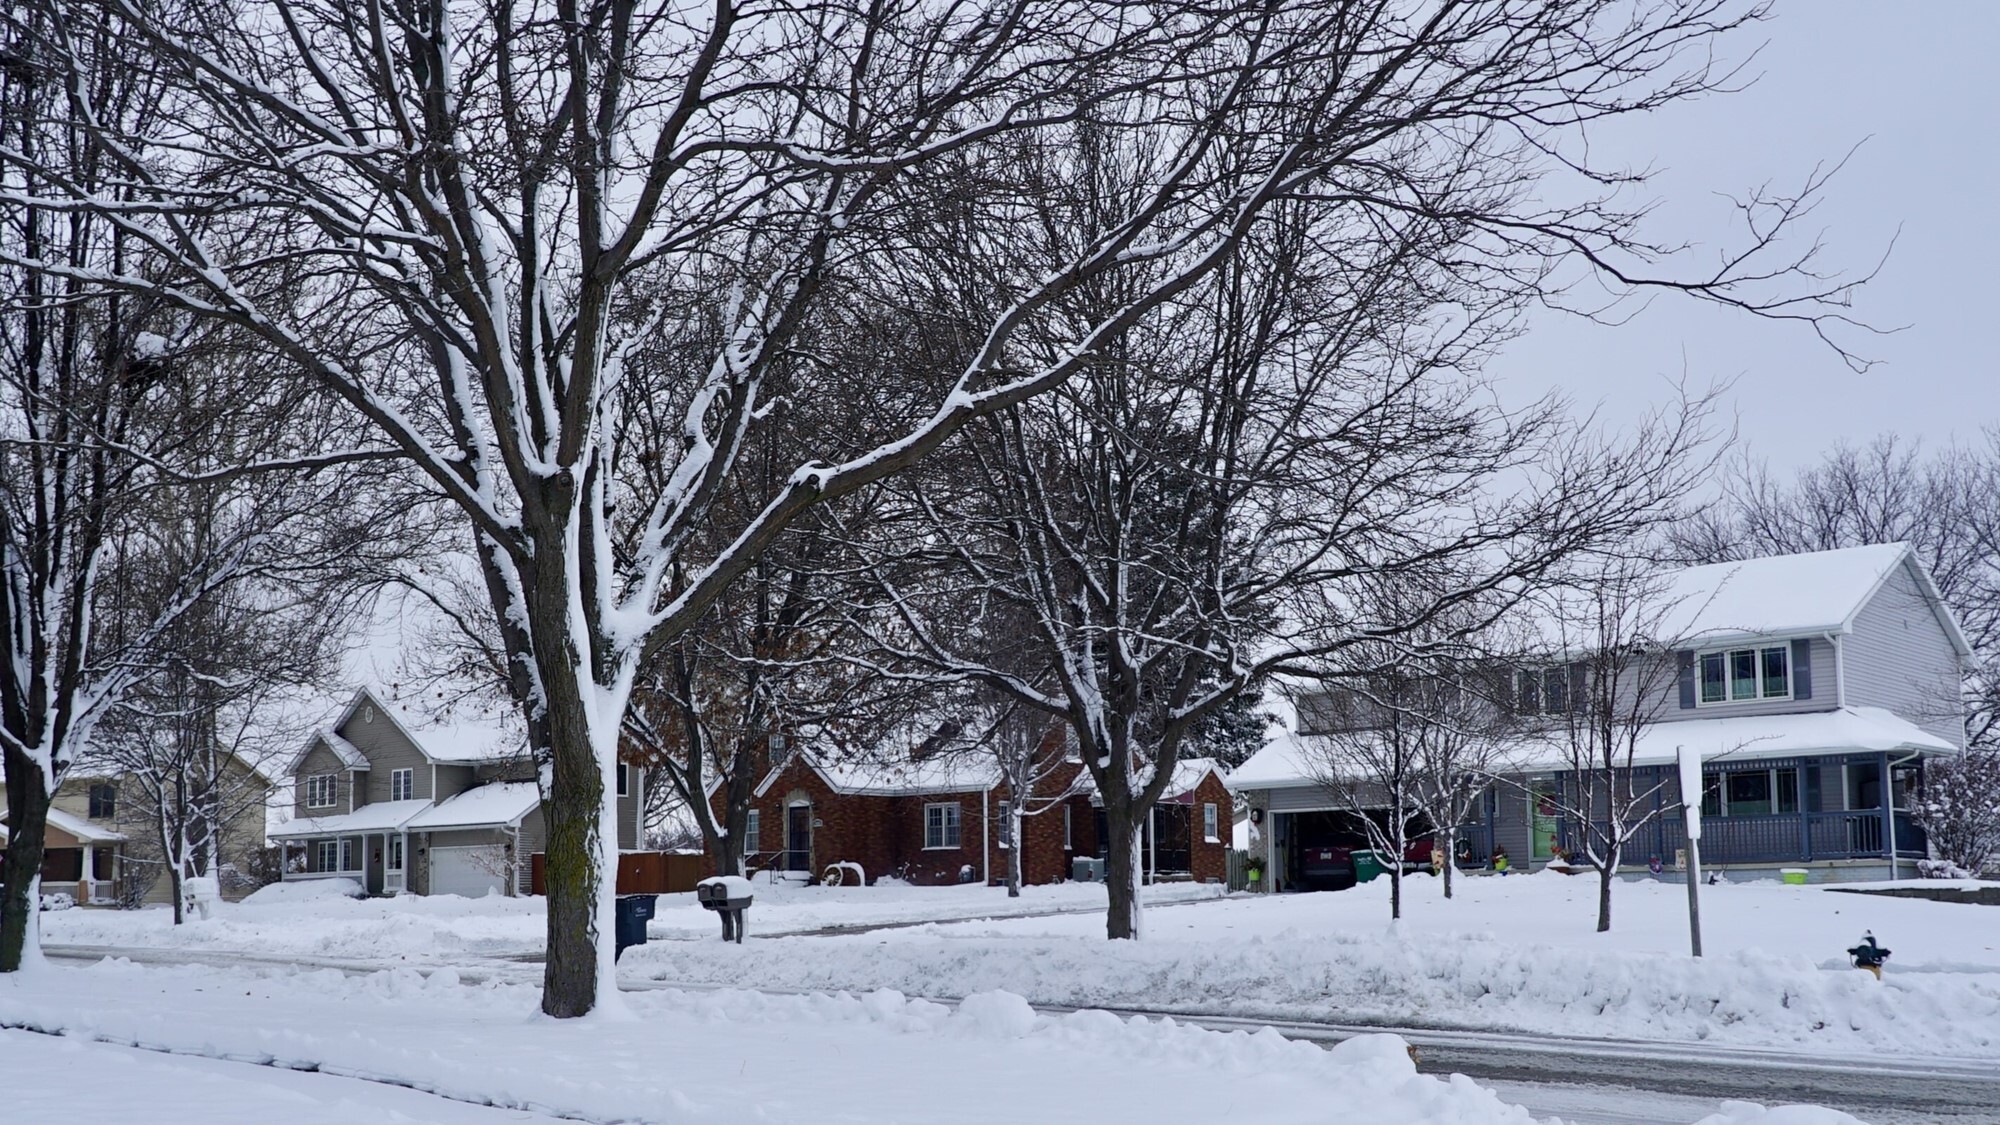 A winter scene with snow-lined trees and homes